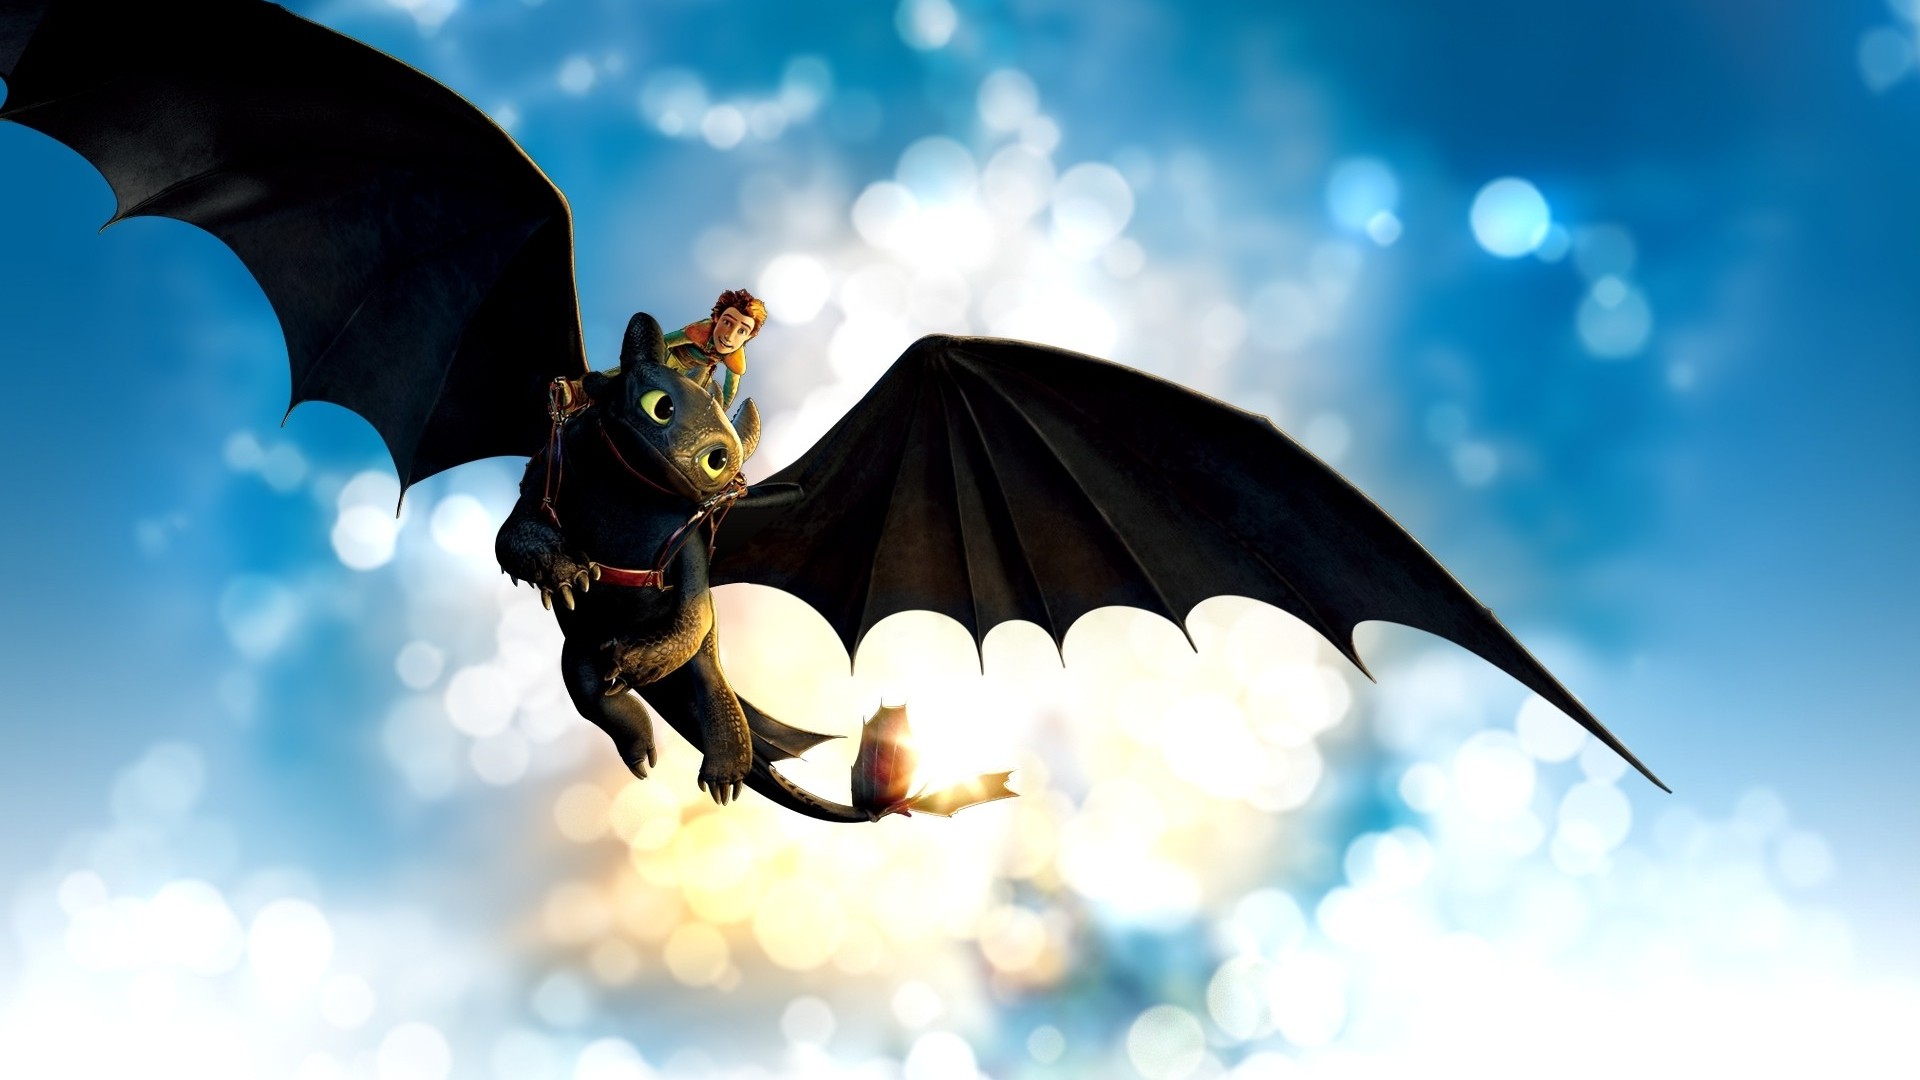 How To Train Your Dragon Wallpaper 1920x1080 How to train your dragon 1920x1080